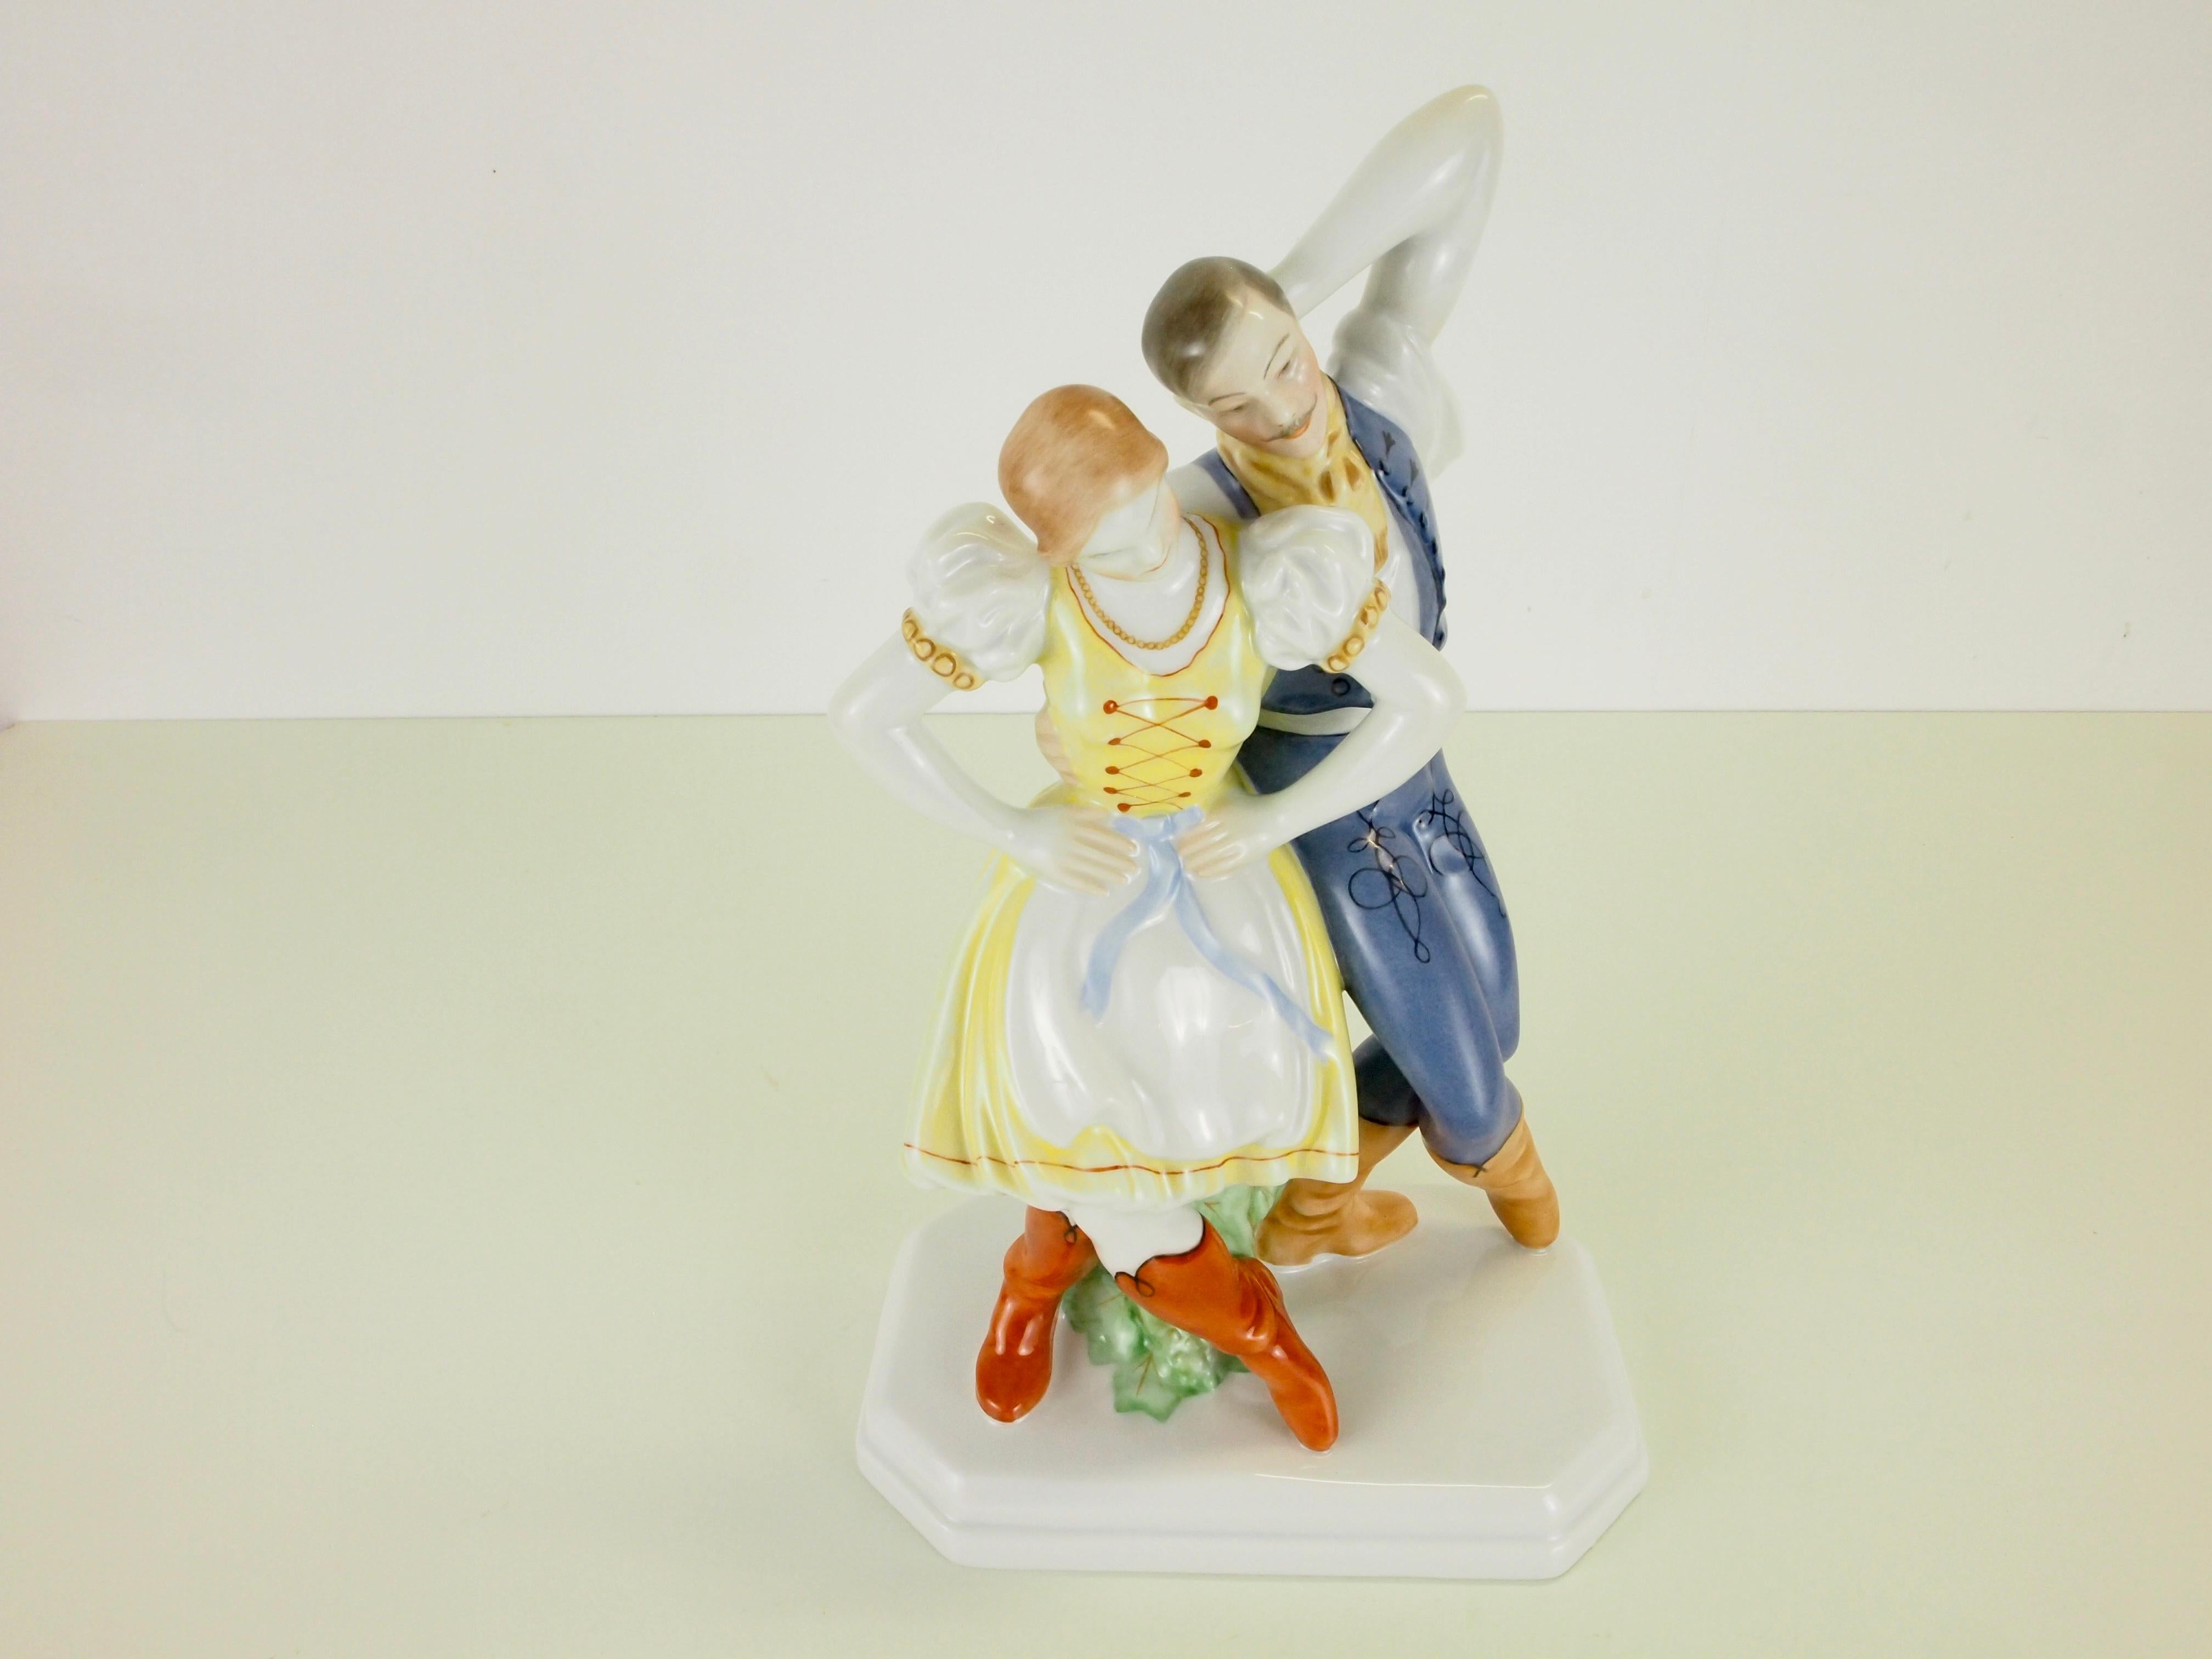 Dancing Couple Porcelain Figurine by Herend Hungary For Sale 7